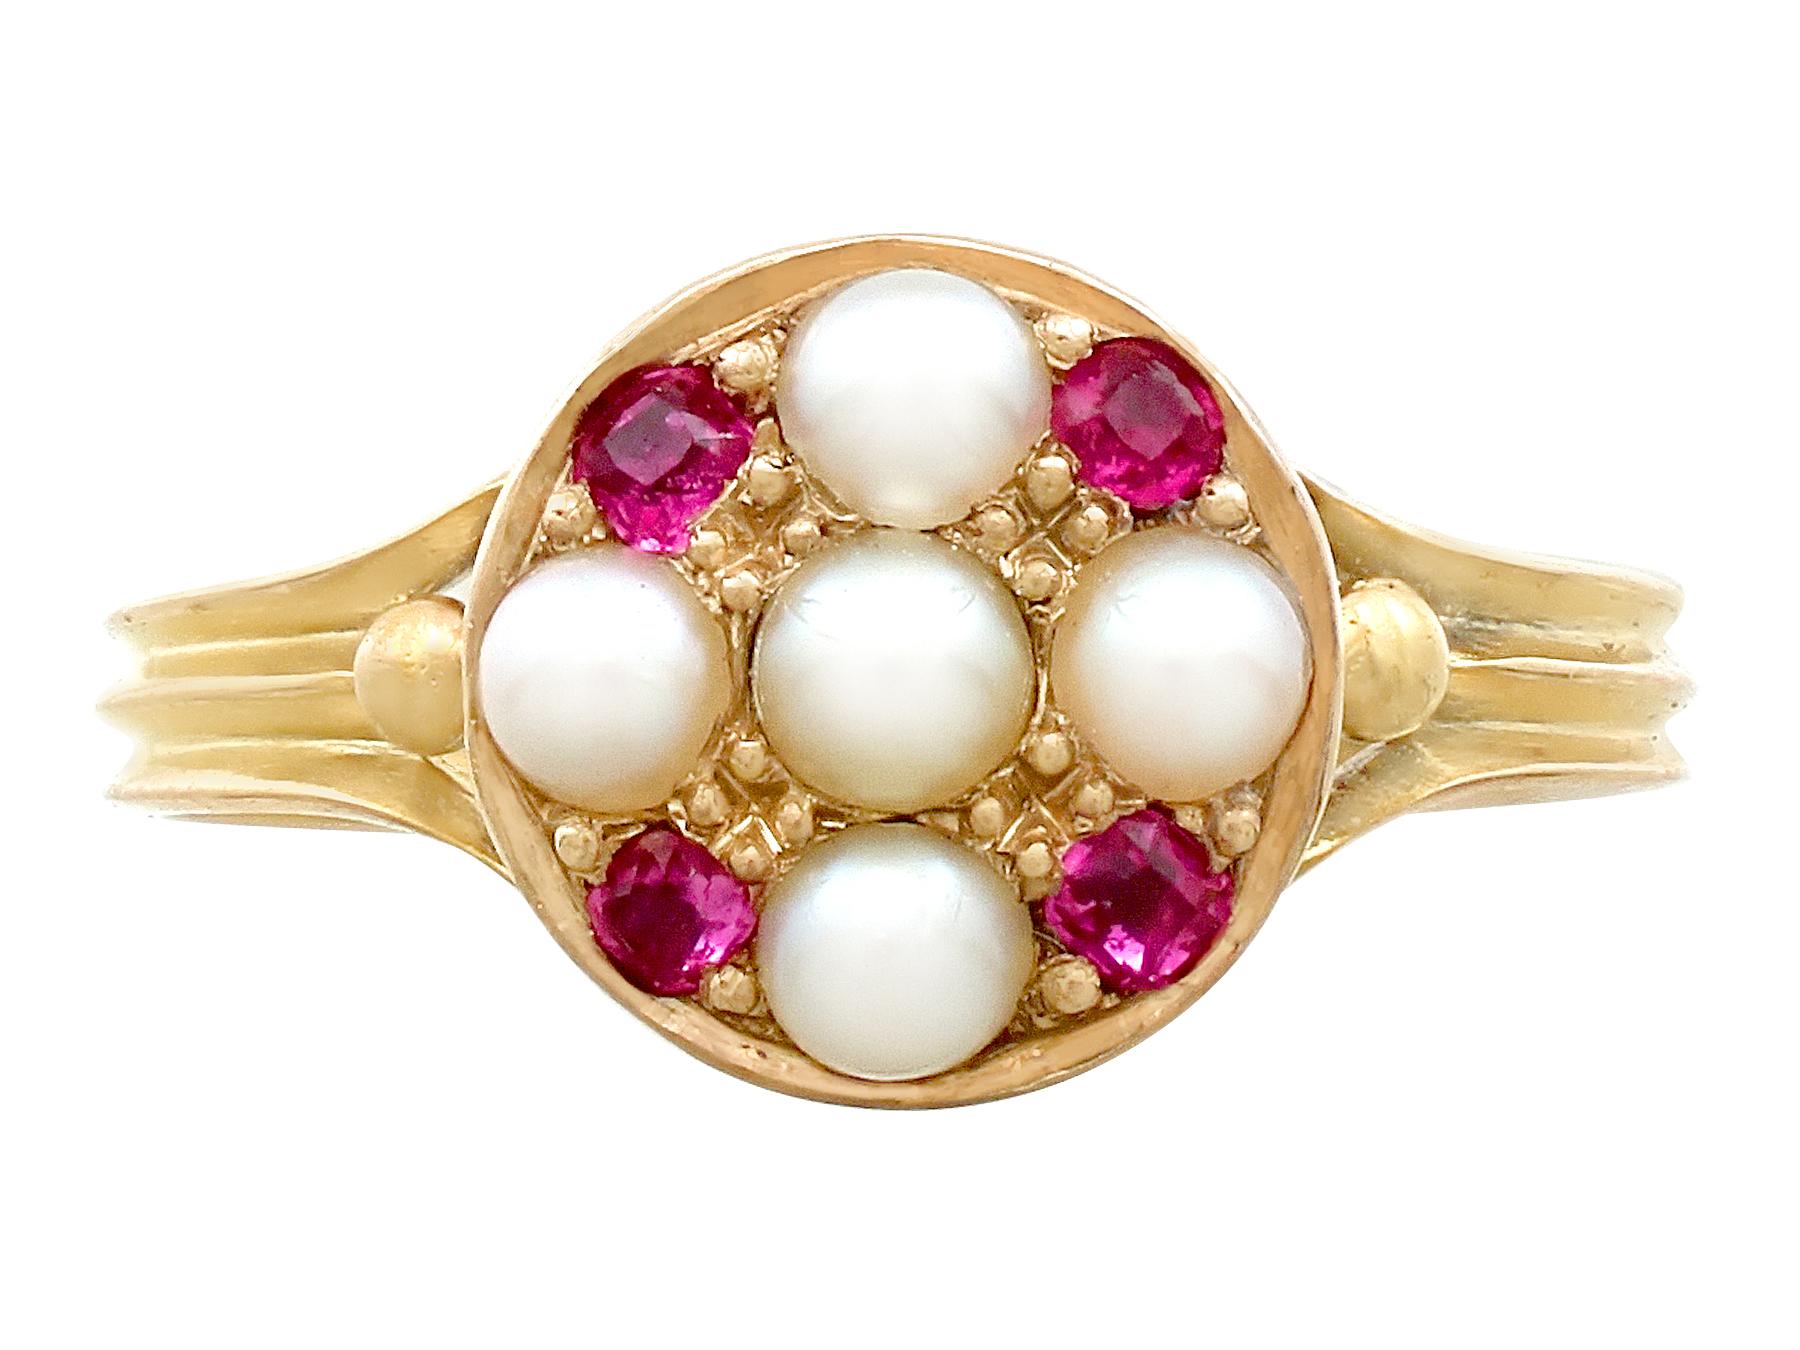 A fine and impressive Victorian natural pearl and 0.16 carat natural ruby, 18 karat yellow gold dress ring; part of our diverse antique jewelry and estate jewelry collections

This fine and impressive antique ruby and pearl ring has been crafted in